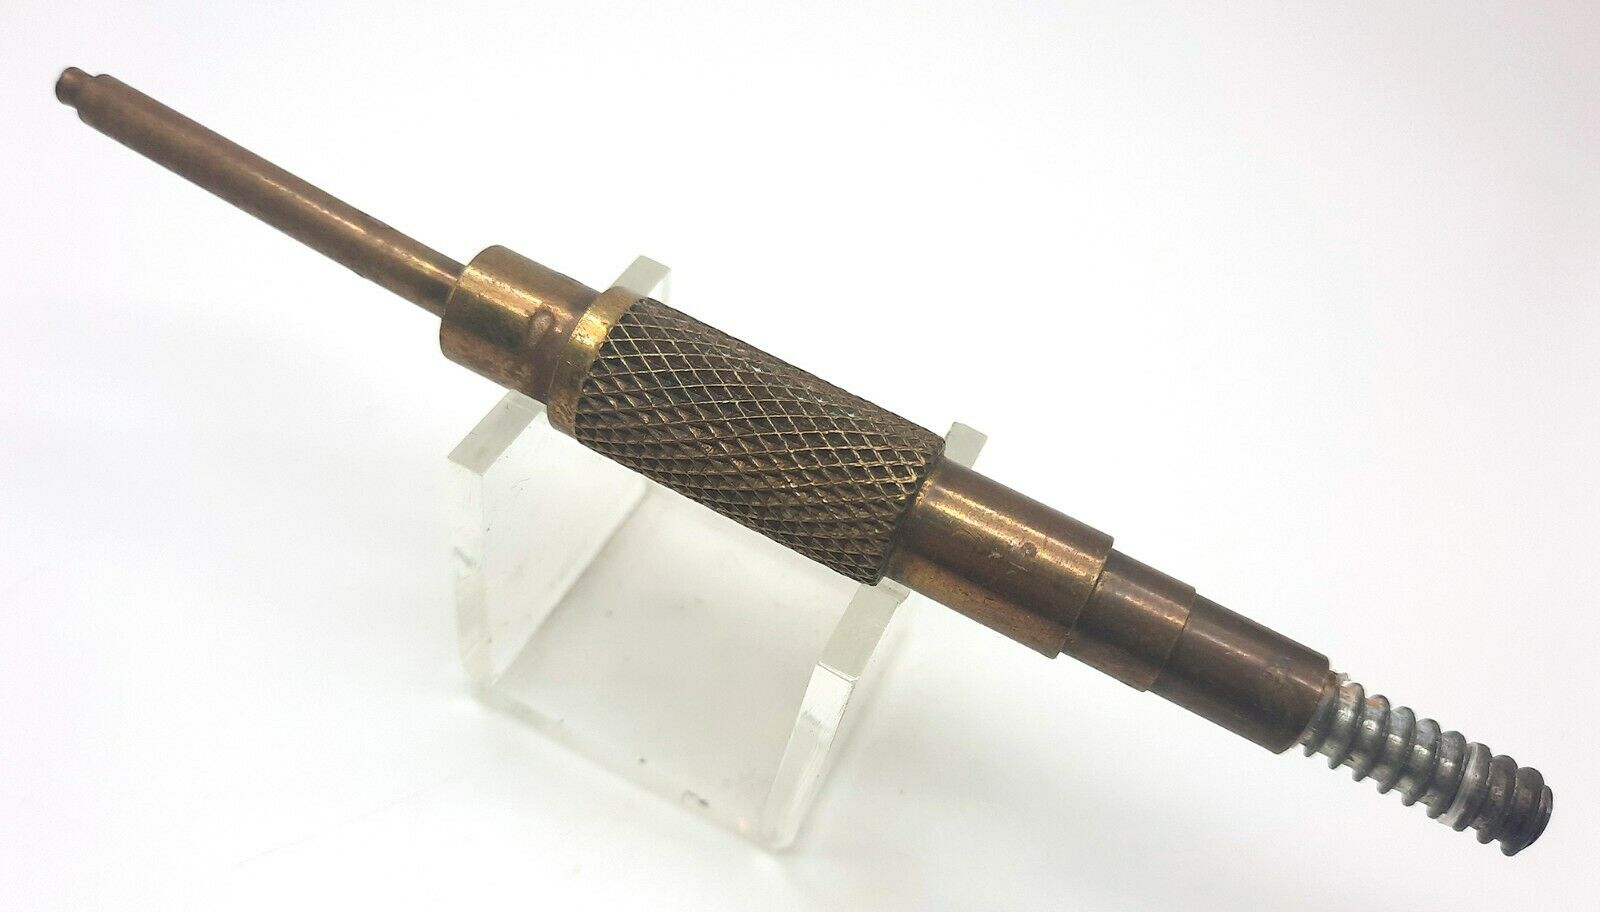 Waterman Factory Fountain Pen Tool To Remove Cap Top Parts (#s307)